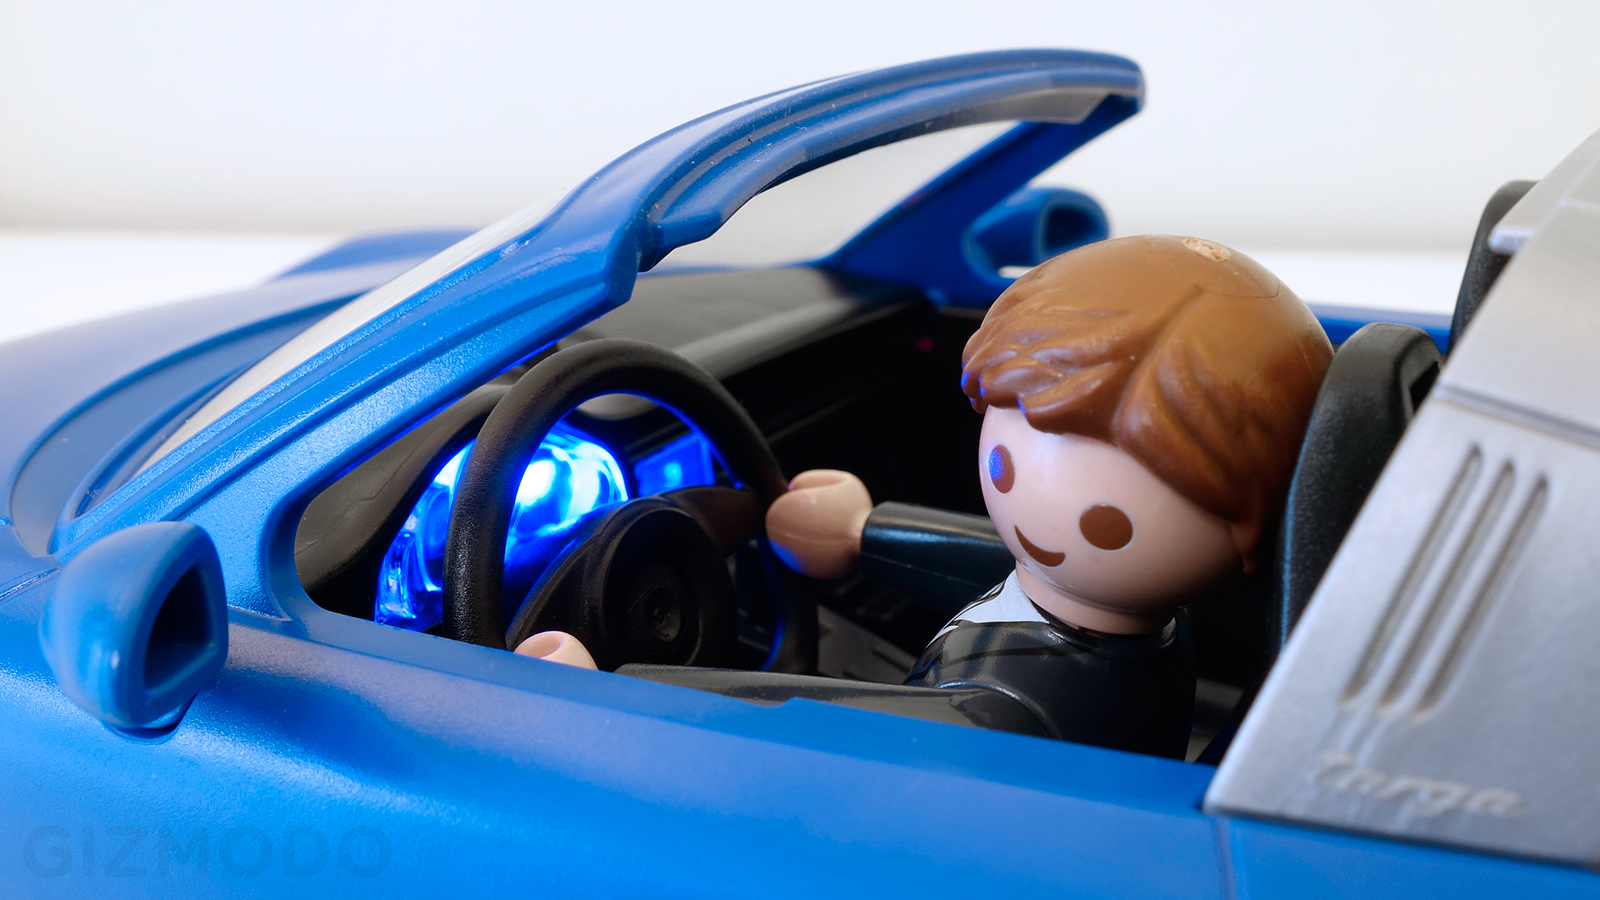 The Best Car Reveal This Week Might Be Playmobil’s Gorgeous New Porsche 911 Targa 4S